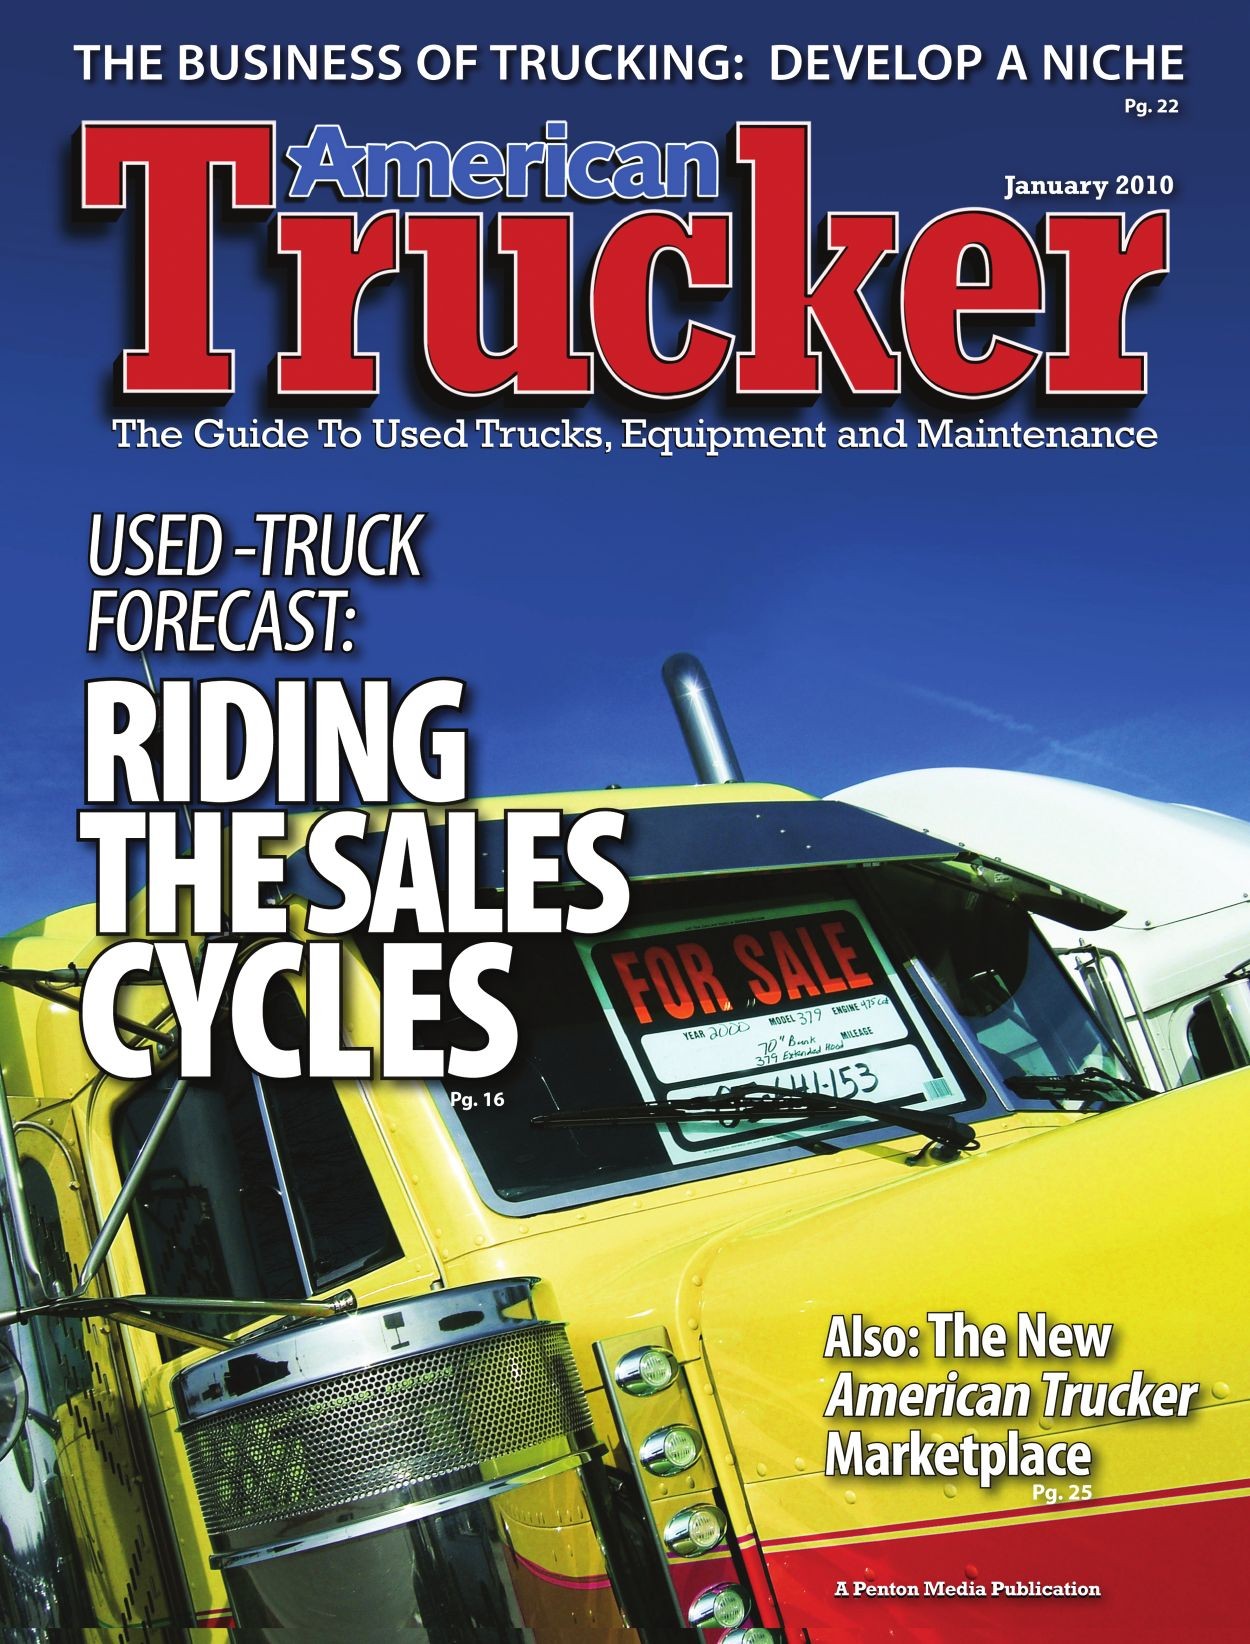 2005 M2 106 Freightliner Air Management Unit American Trucker January East 2010 by American Trucker issuu Of 2005 M2 106 Freightliner Air Management Unit